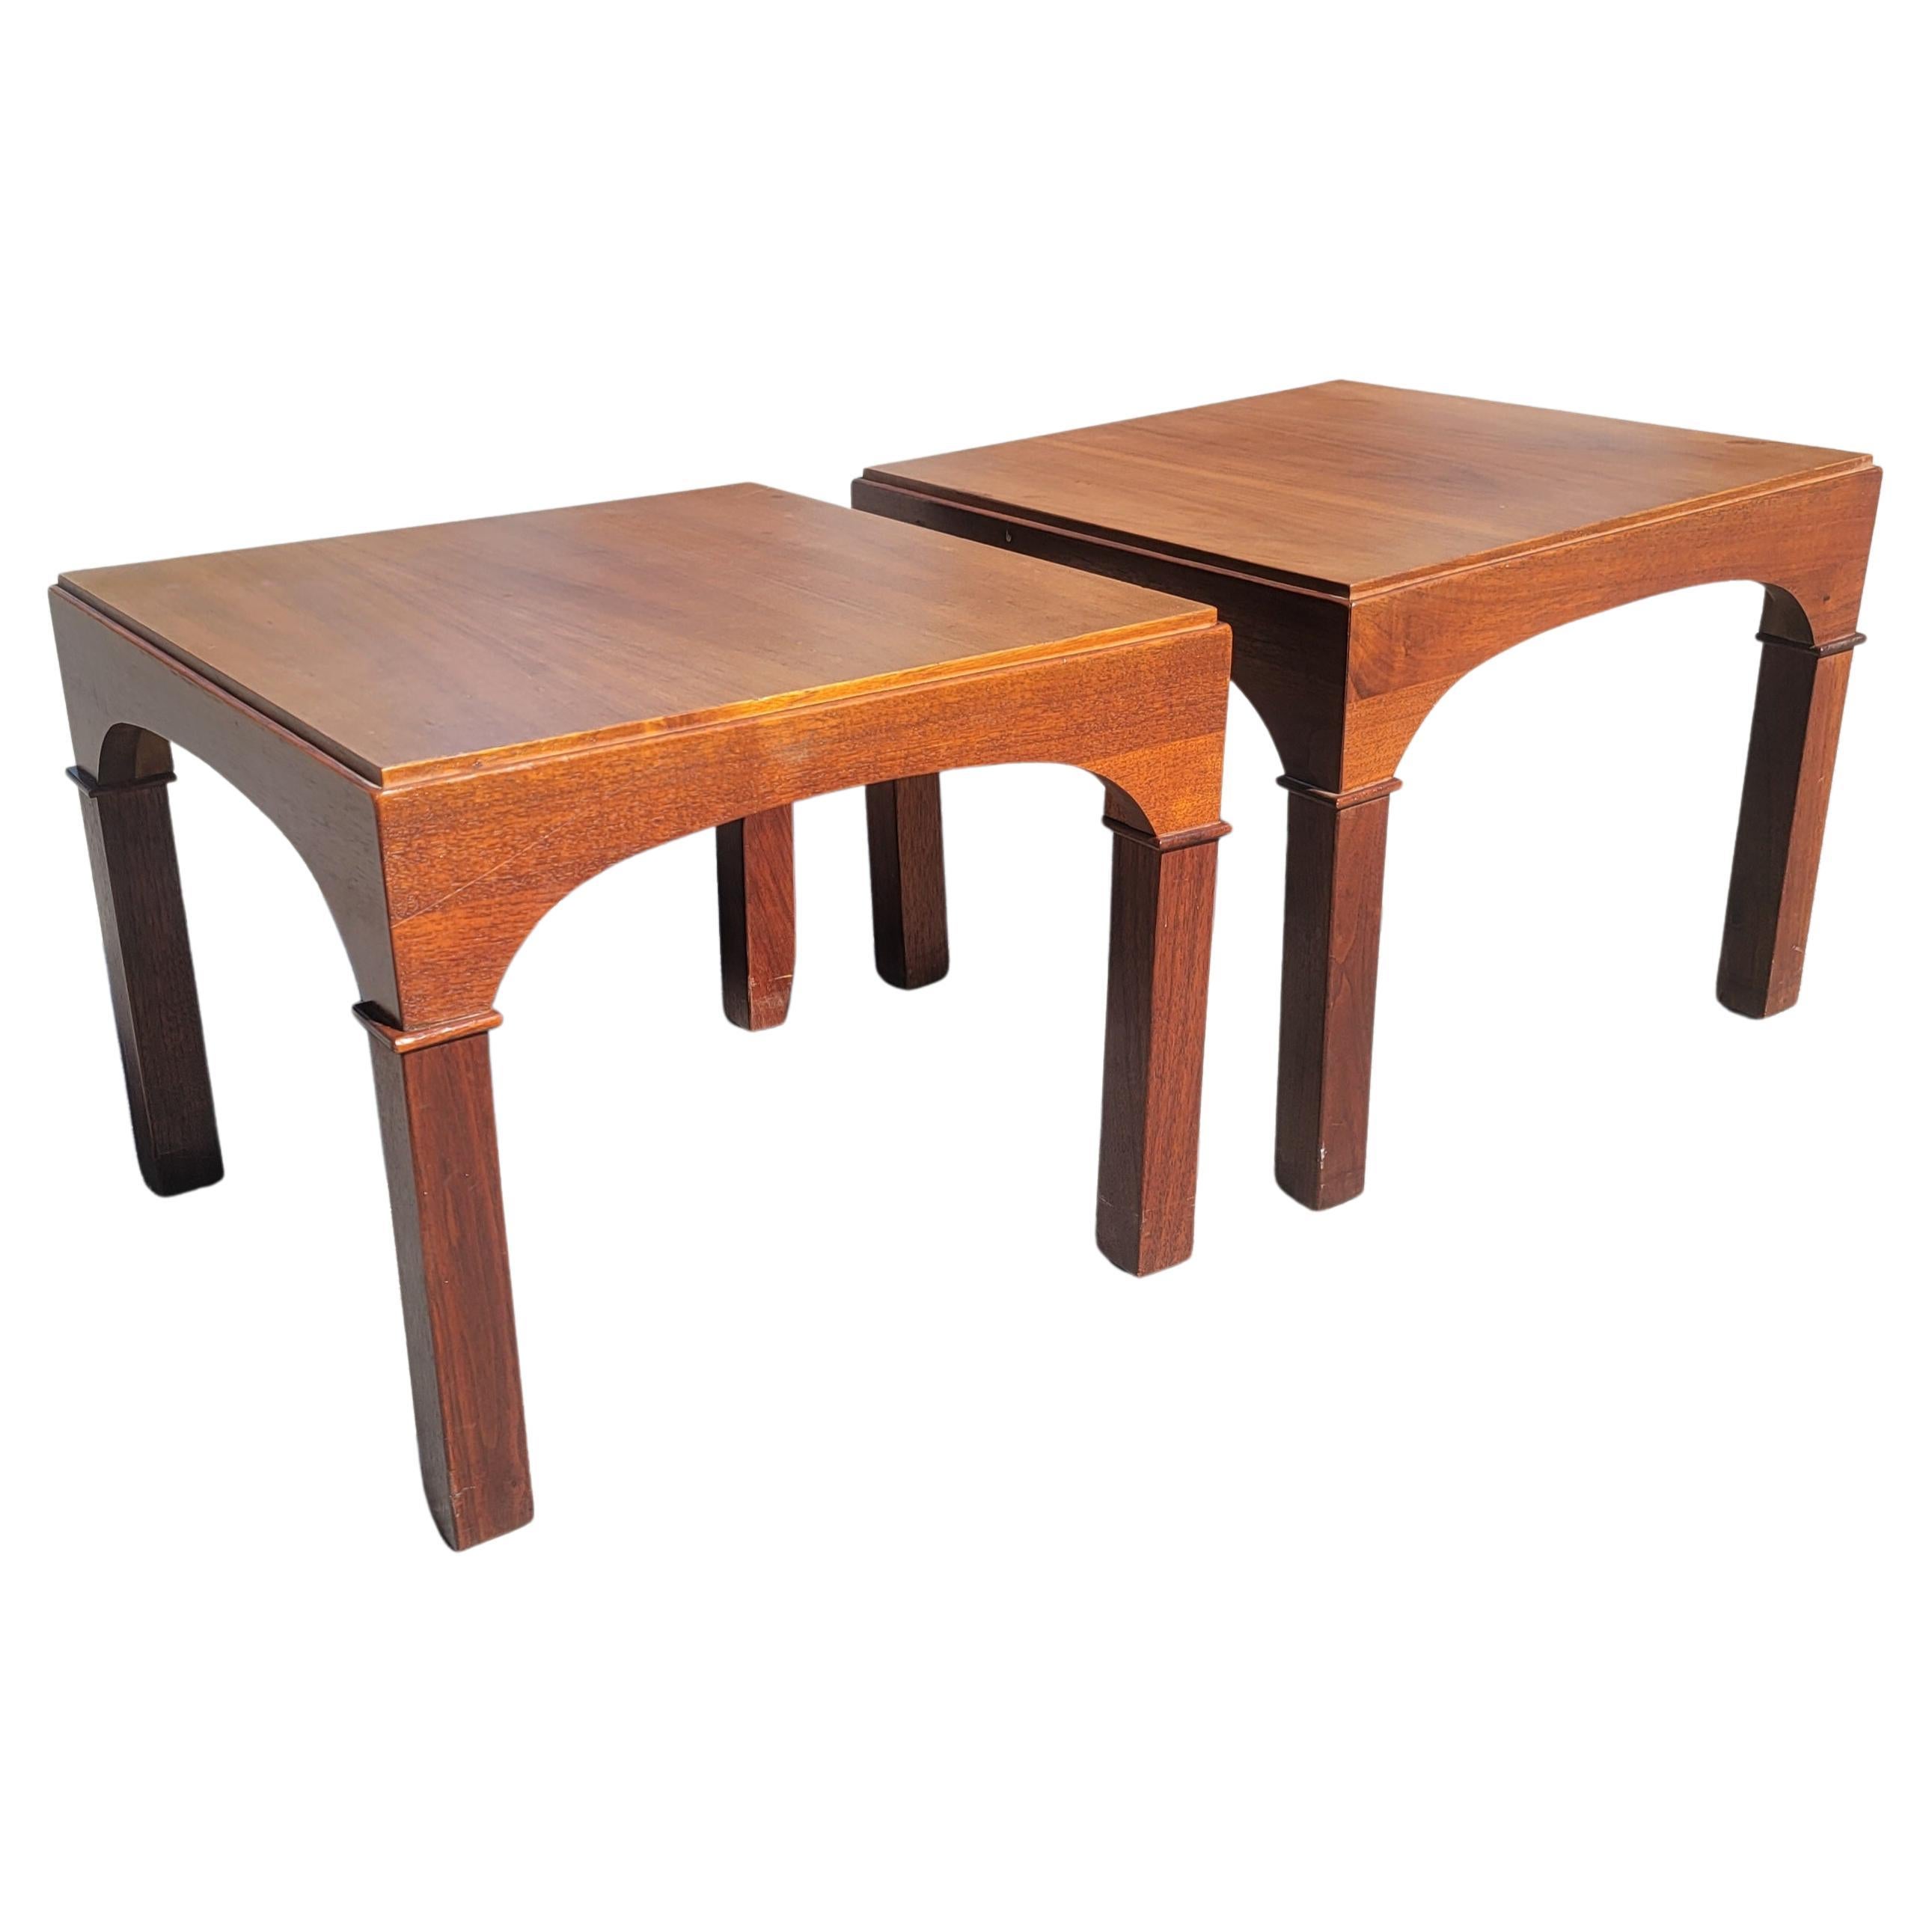 20th Century Mid-Century Modern Parsons Walnut Side Tables, a Pair For Sale